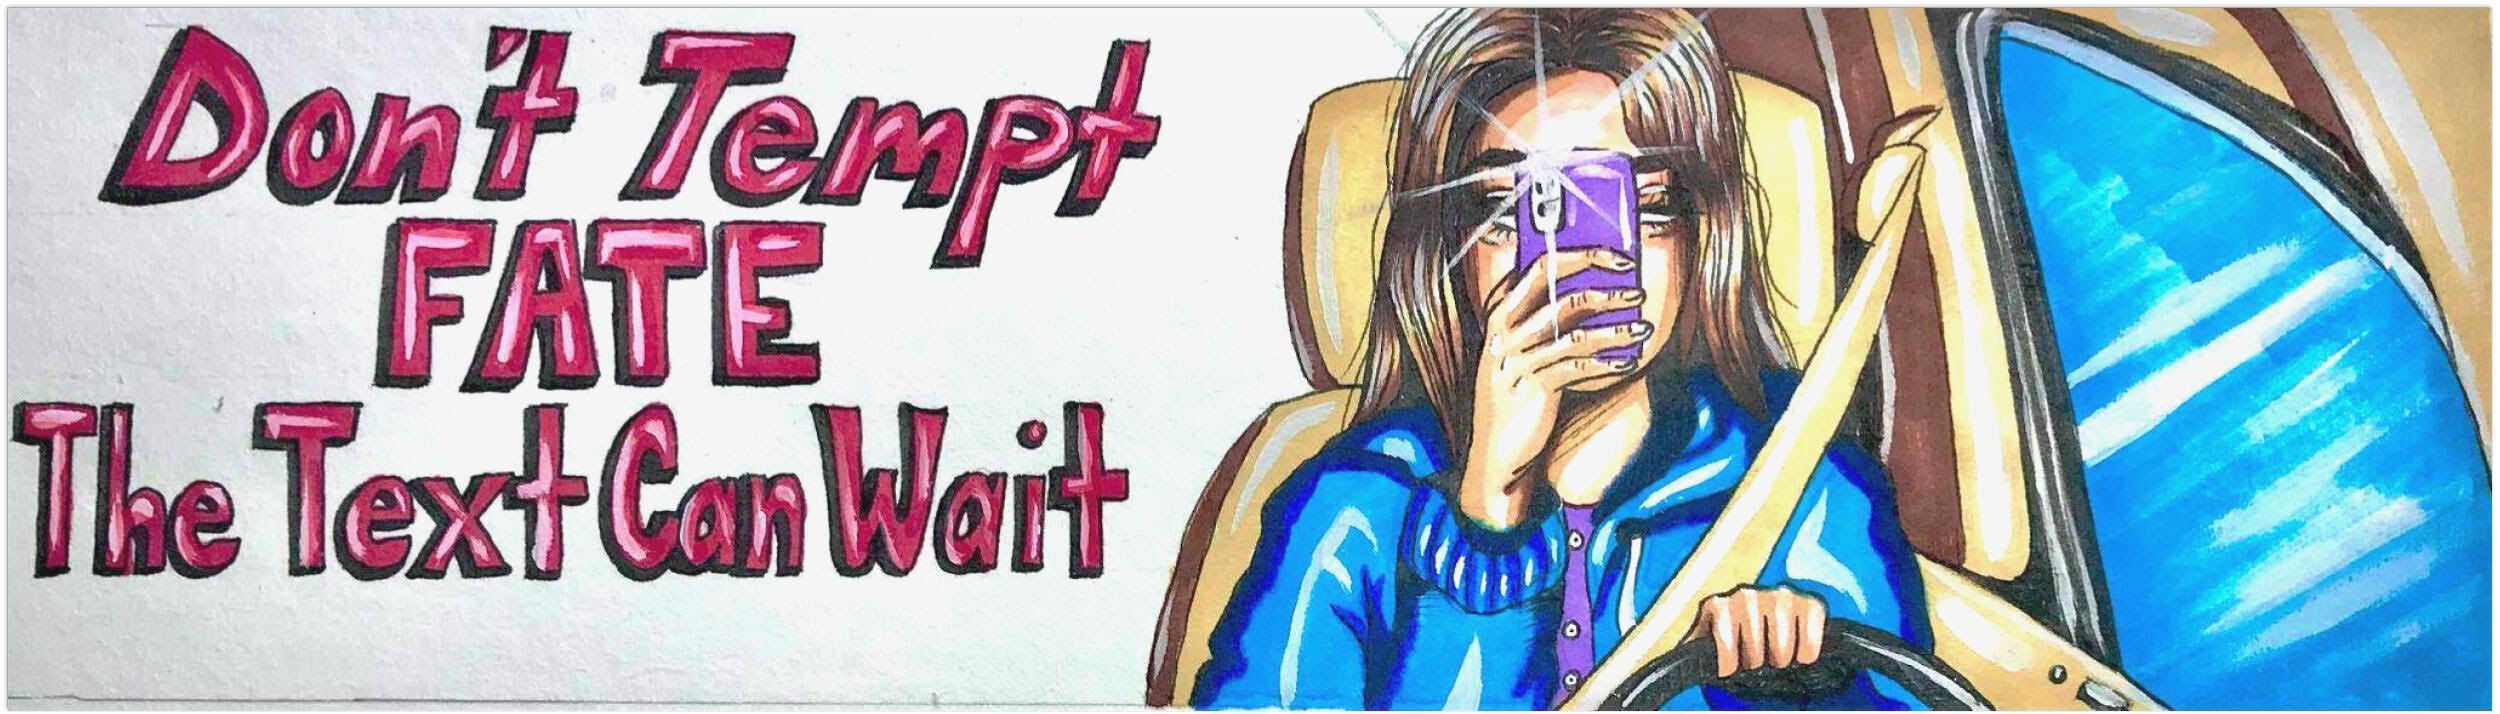 a drawing of a young woman using a phone while driving with the text "Don’t Tempt Fate the text can wait"